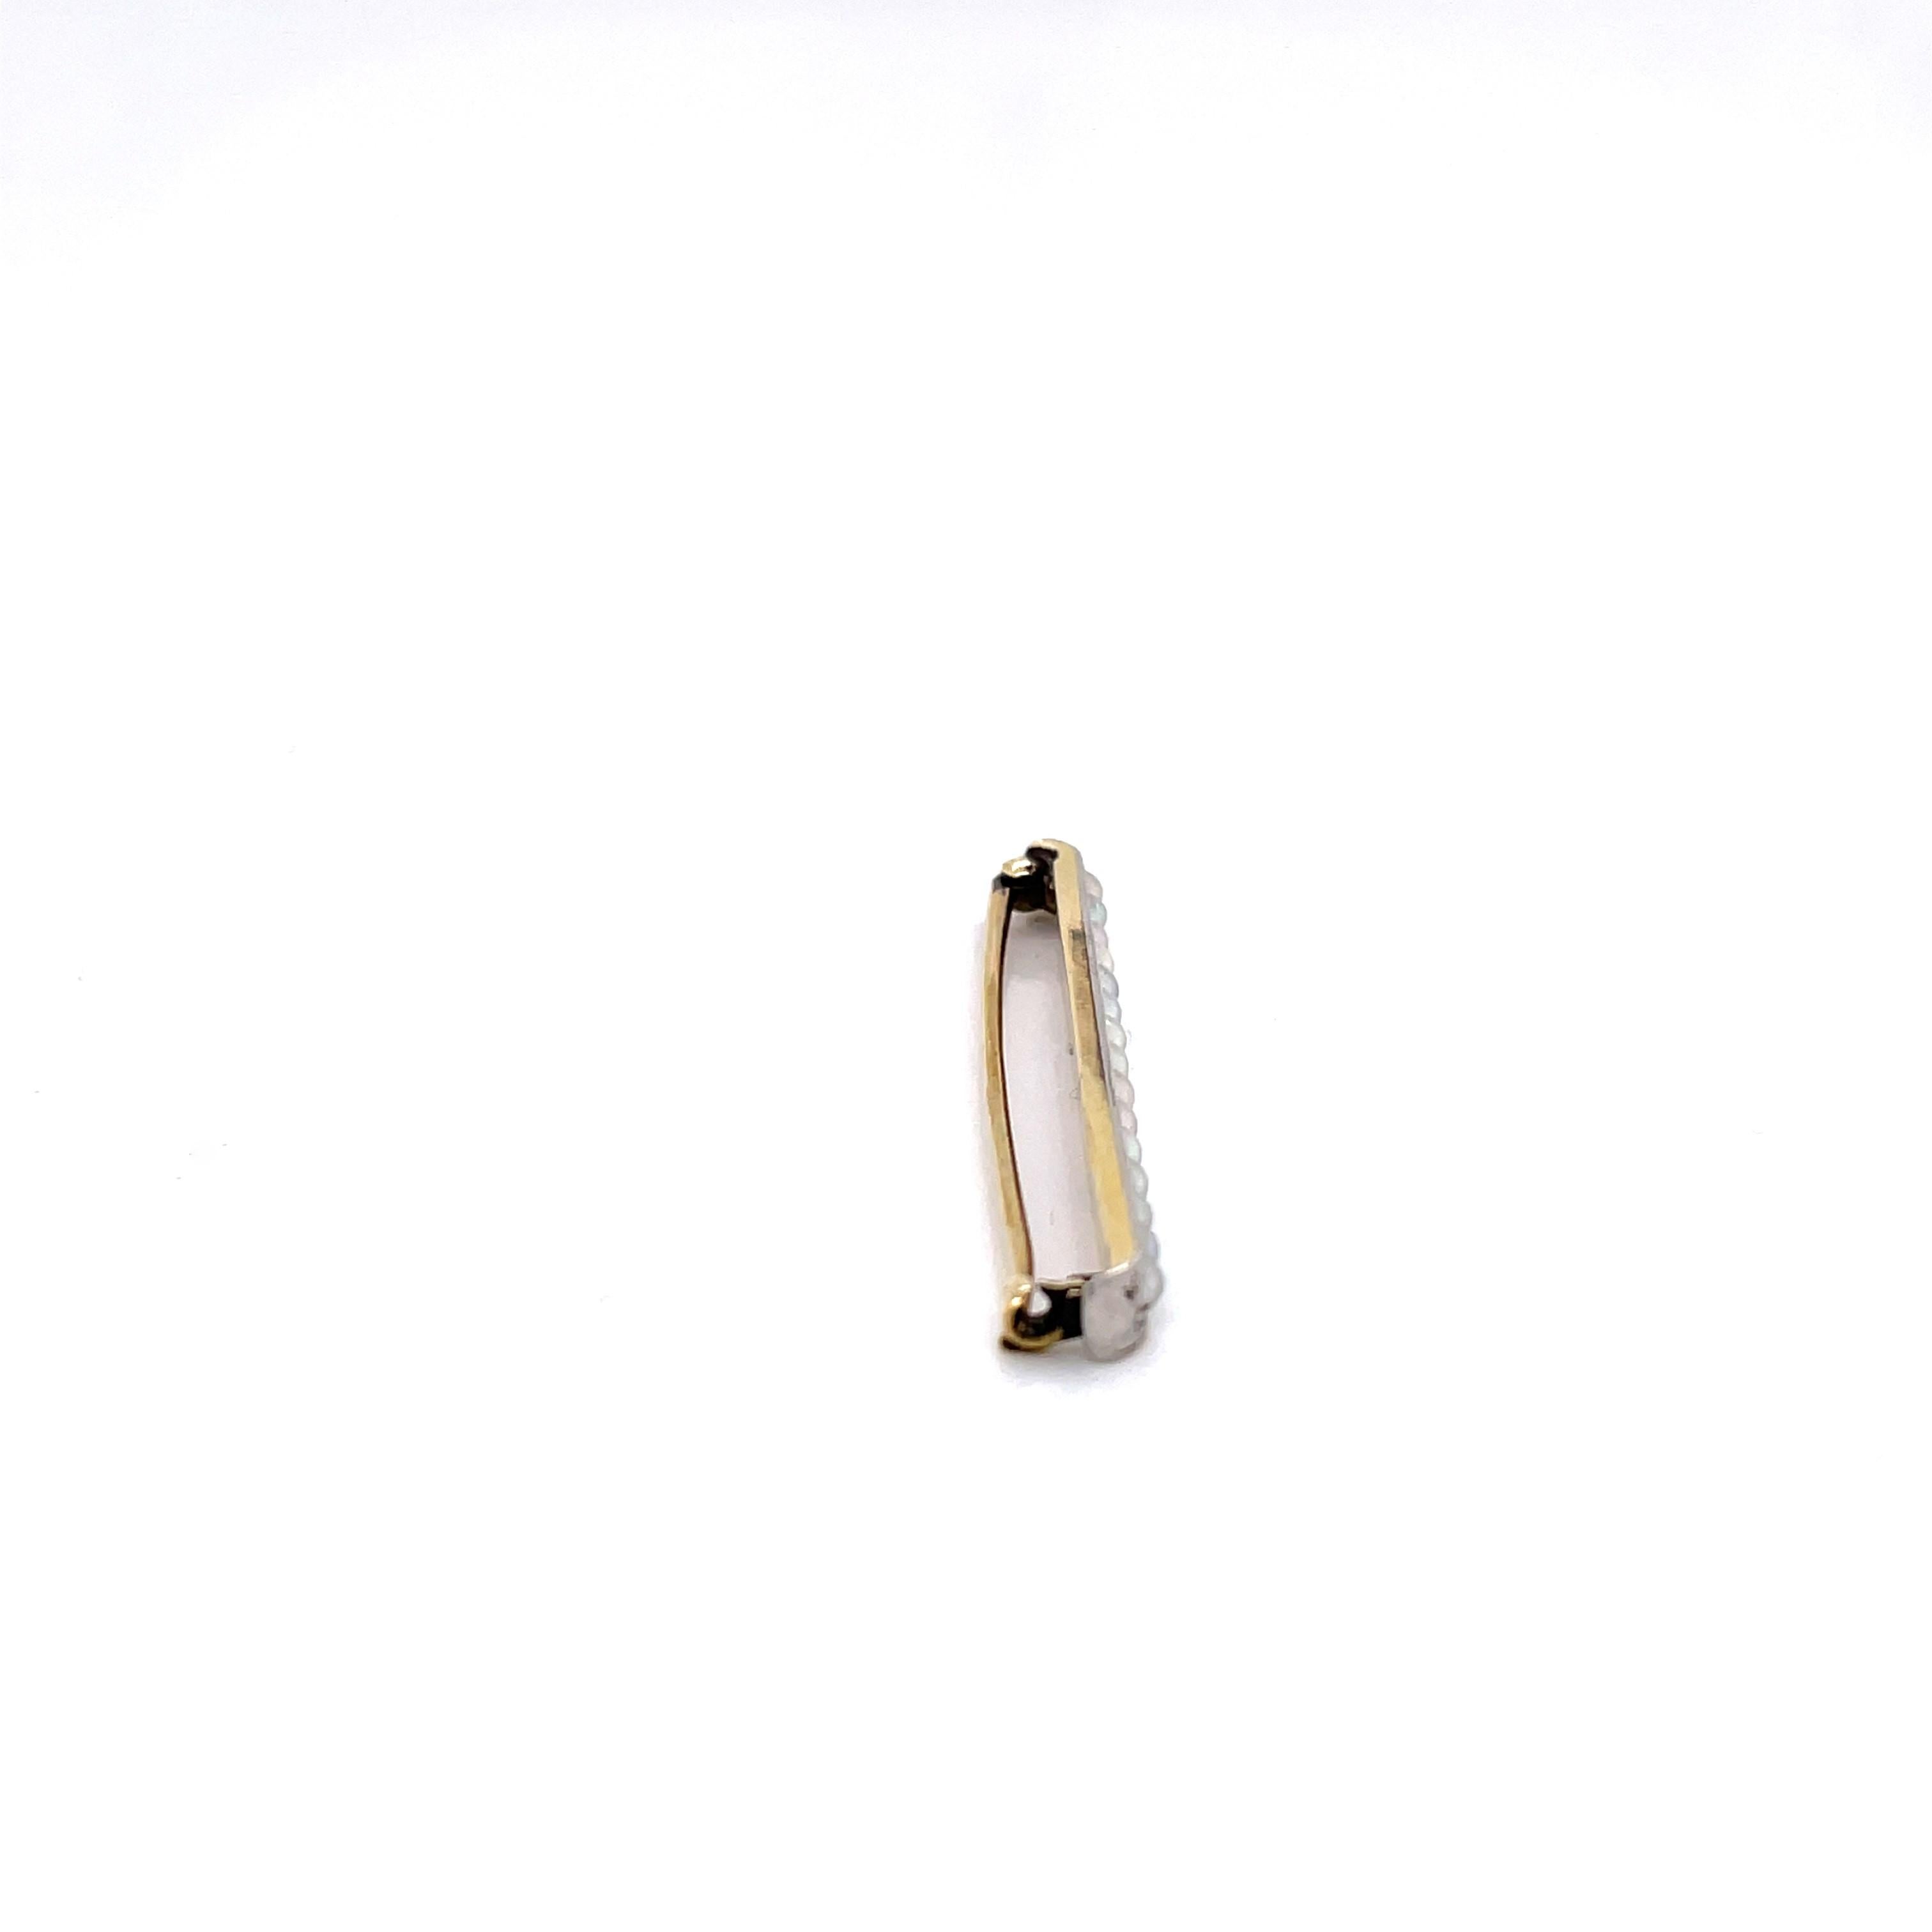 Vintage Petite Pearl Gold Bar Pin Brooch In Good Condition For Sale In Mount Kisco, NY